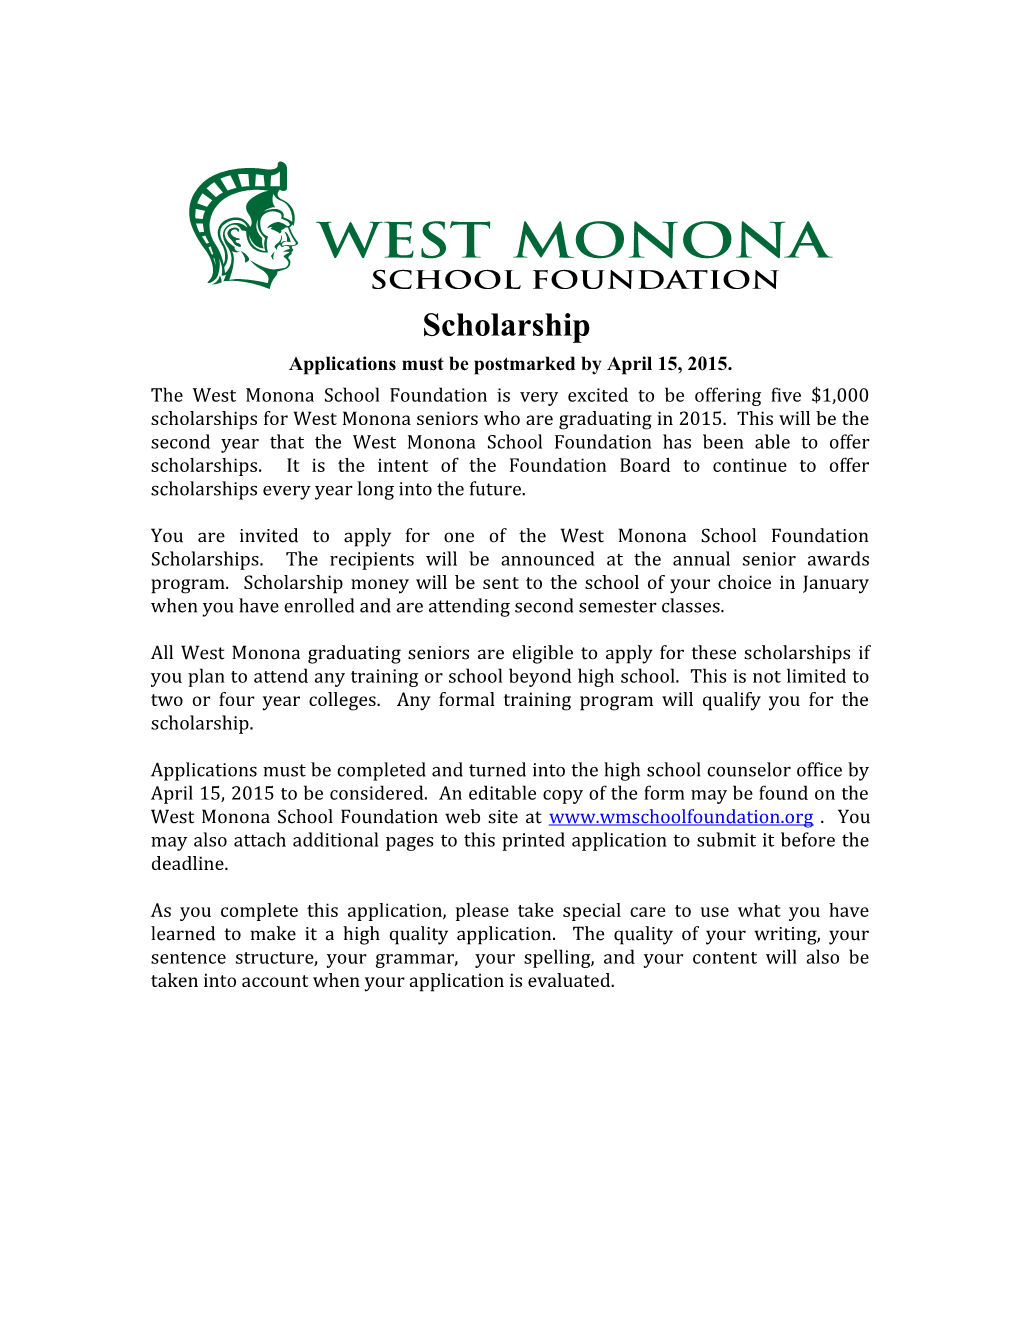 Applications Must Be Postmarked by April 15, 2015